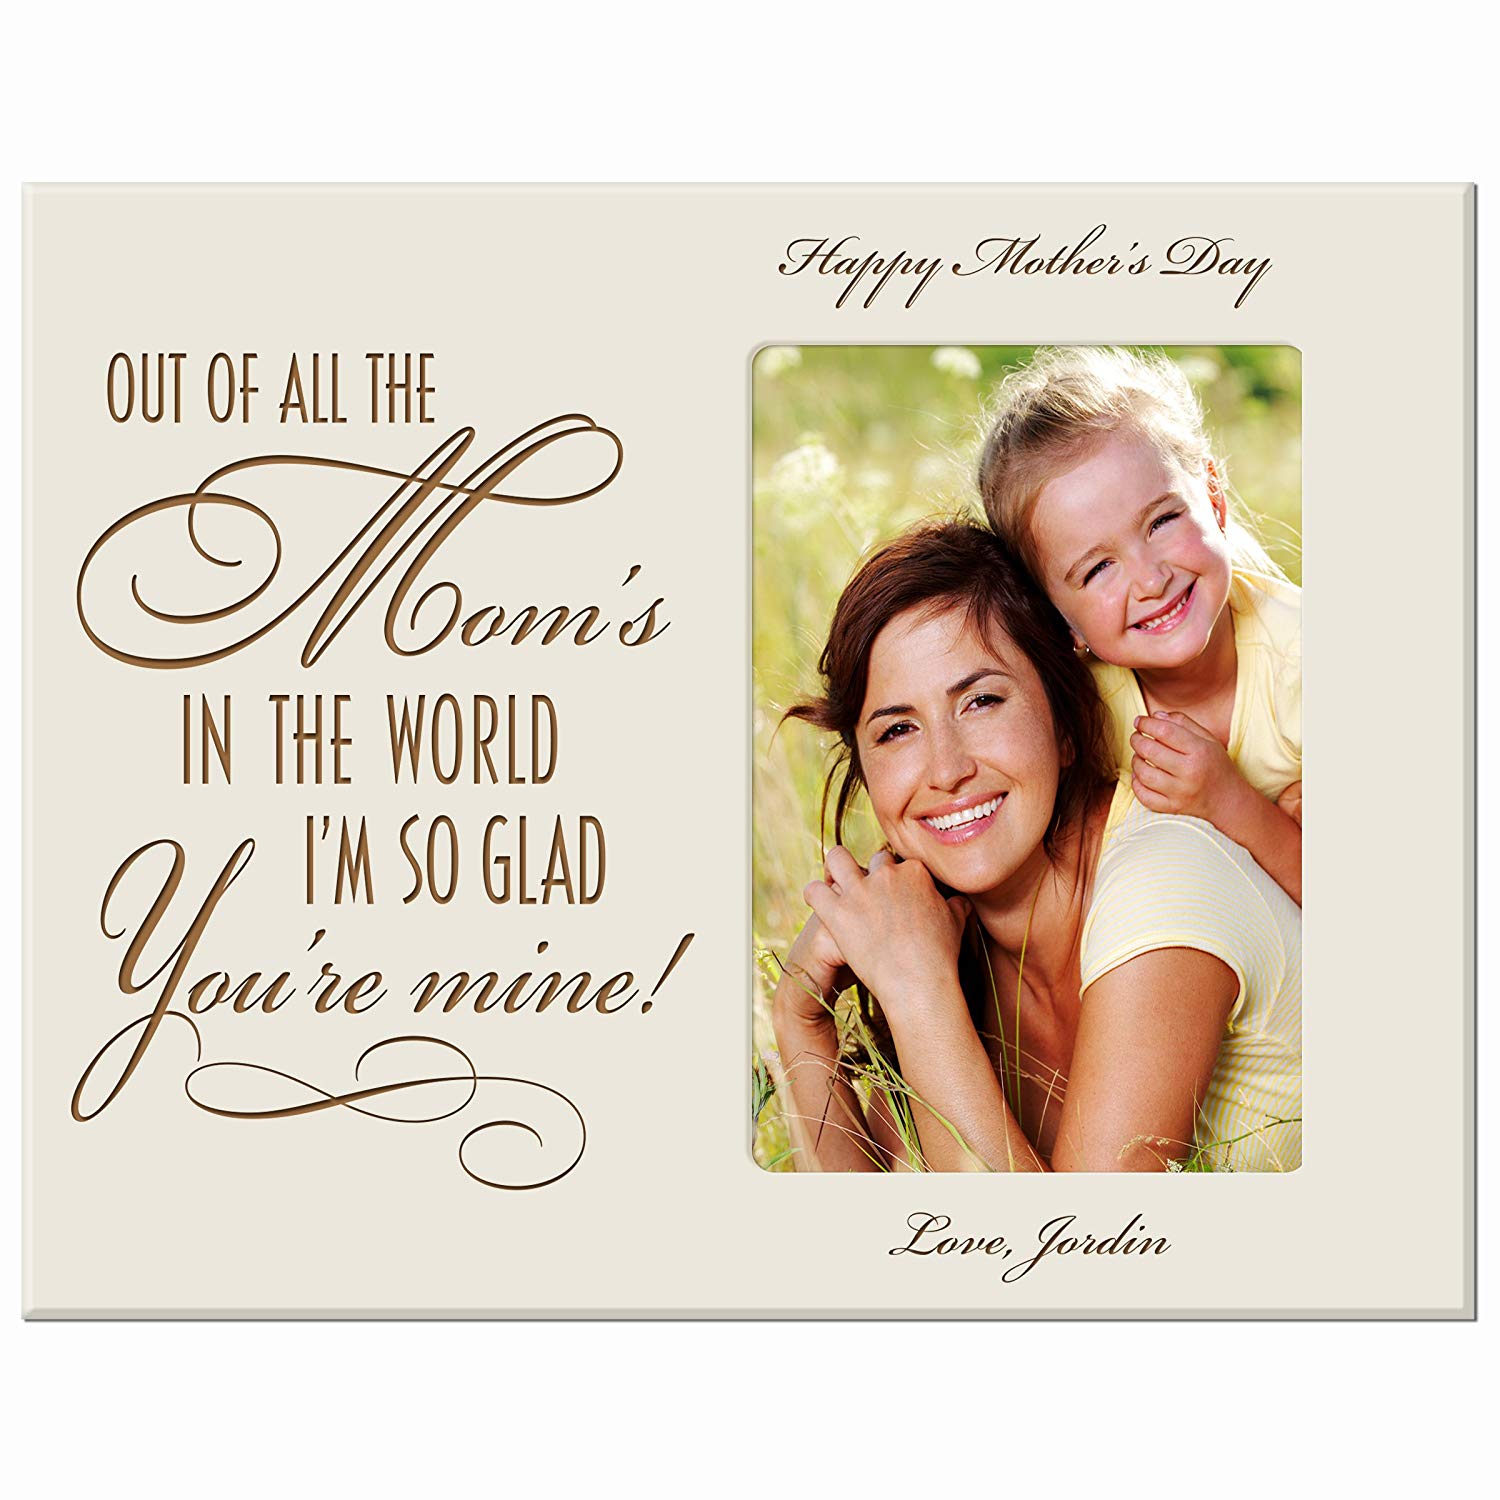 Personalized Happy Mother's Day Photo Frame - Out Of All The Mom's Ivory